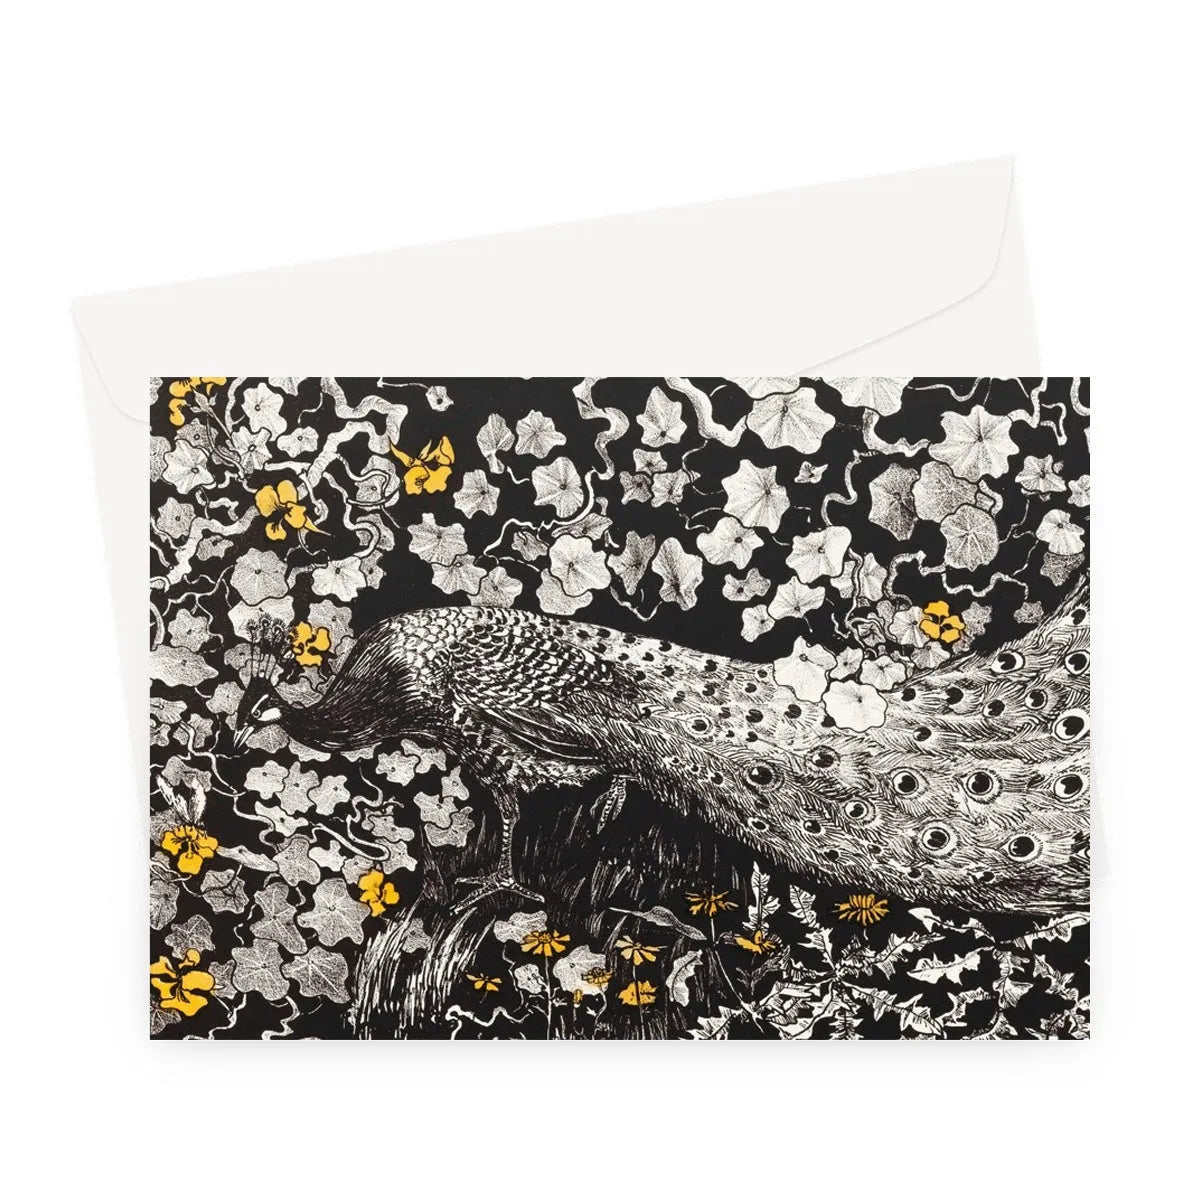 Peacock By Theo Van Hoytema Greeting Card - A5 Landscape / 1 Card - Greeting & Note Cards - Aesthetic Art